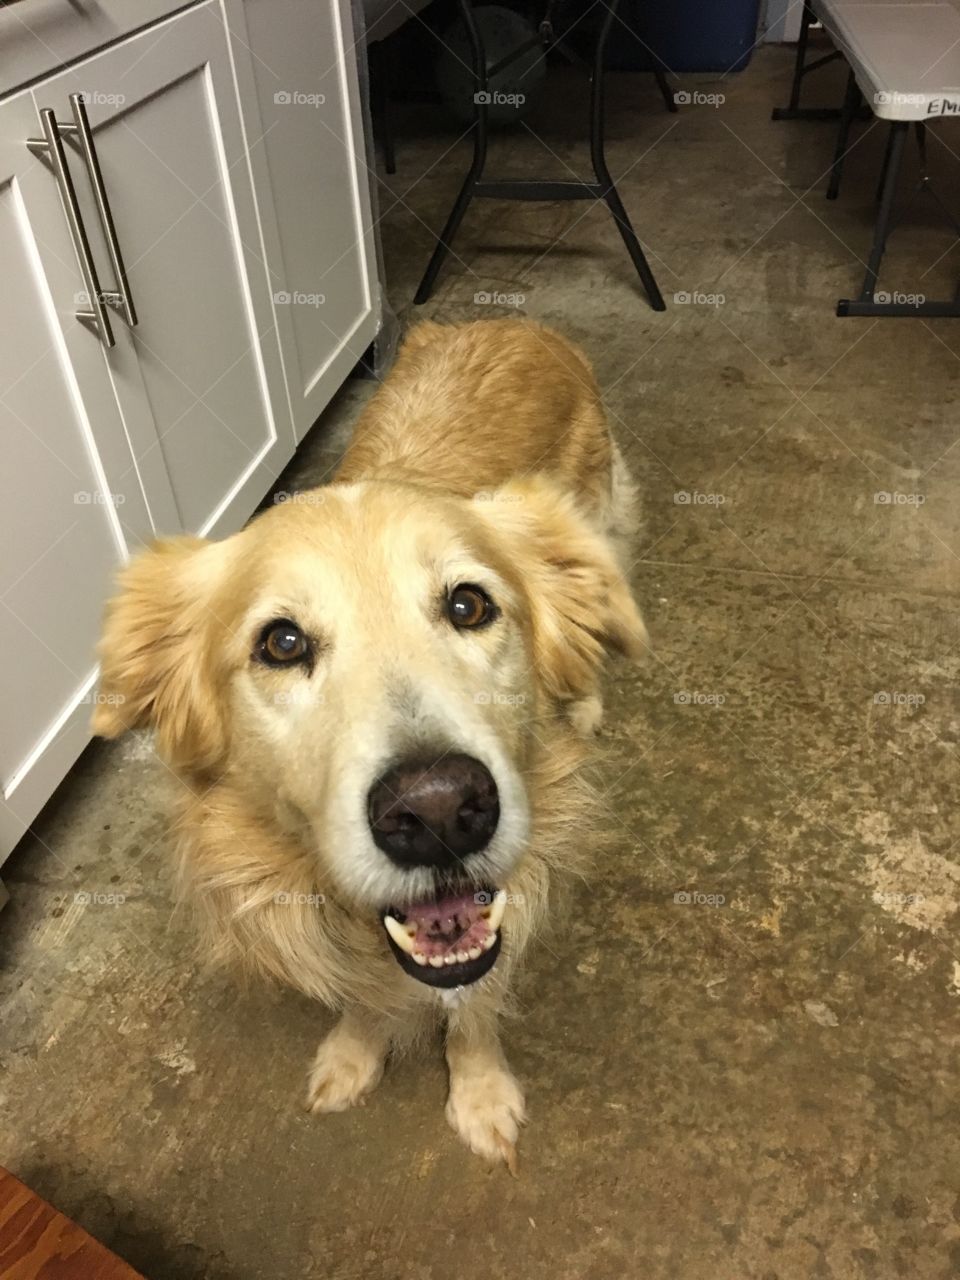 Very happy senior golden retriever and border collie mix dog. Nothing quite like a smile from a dog you love. 